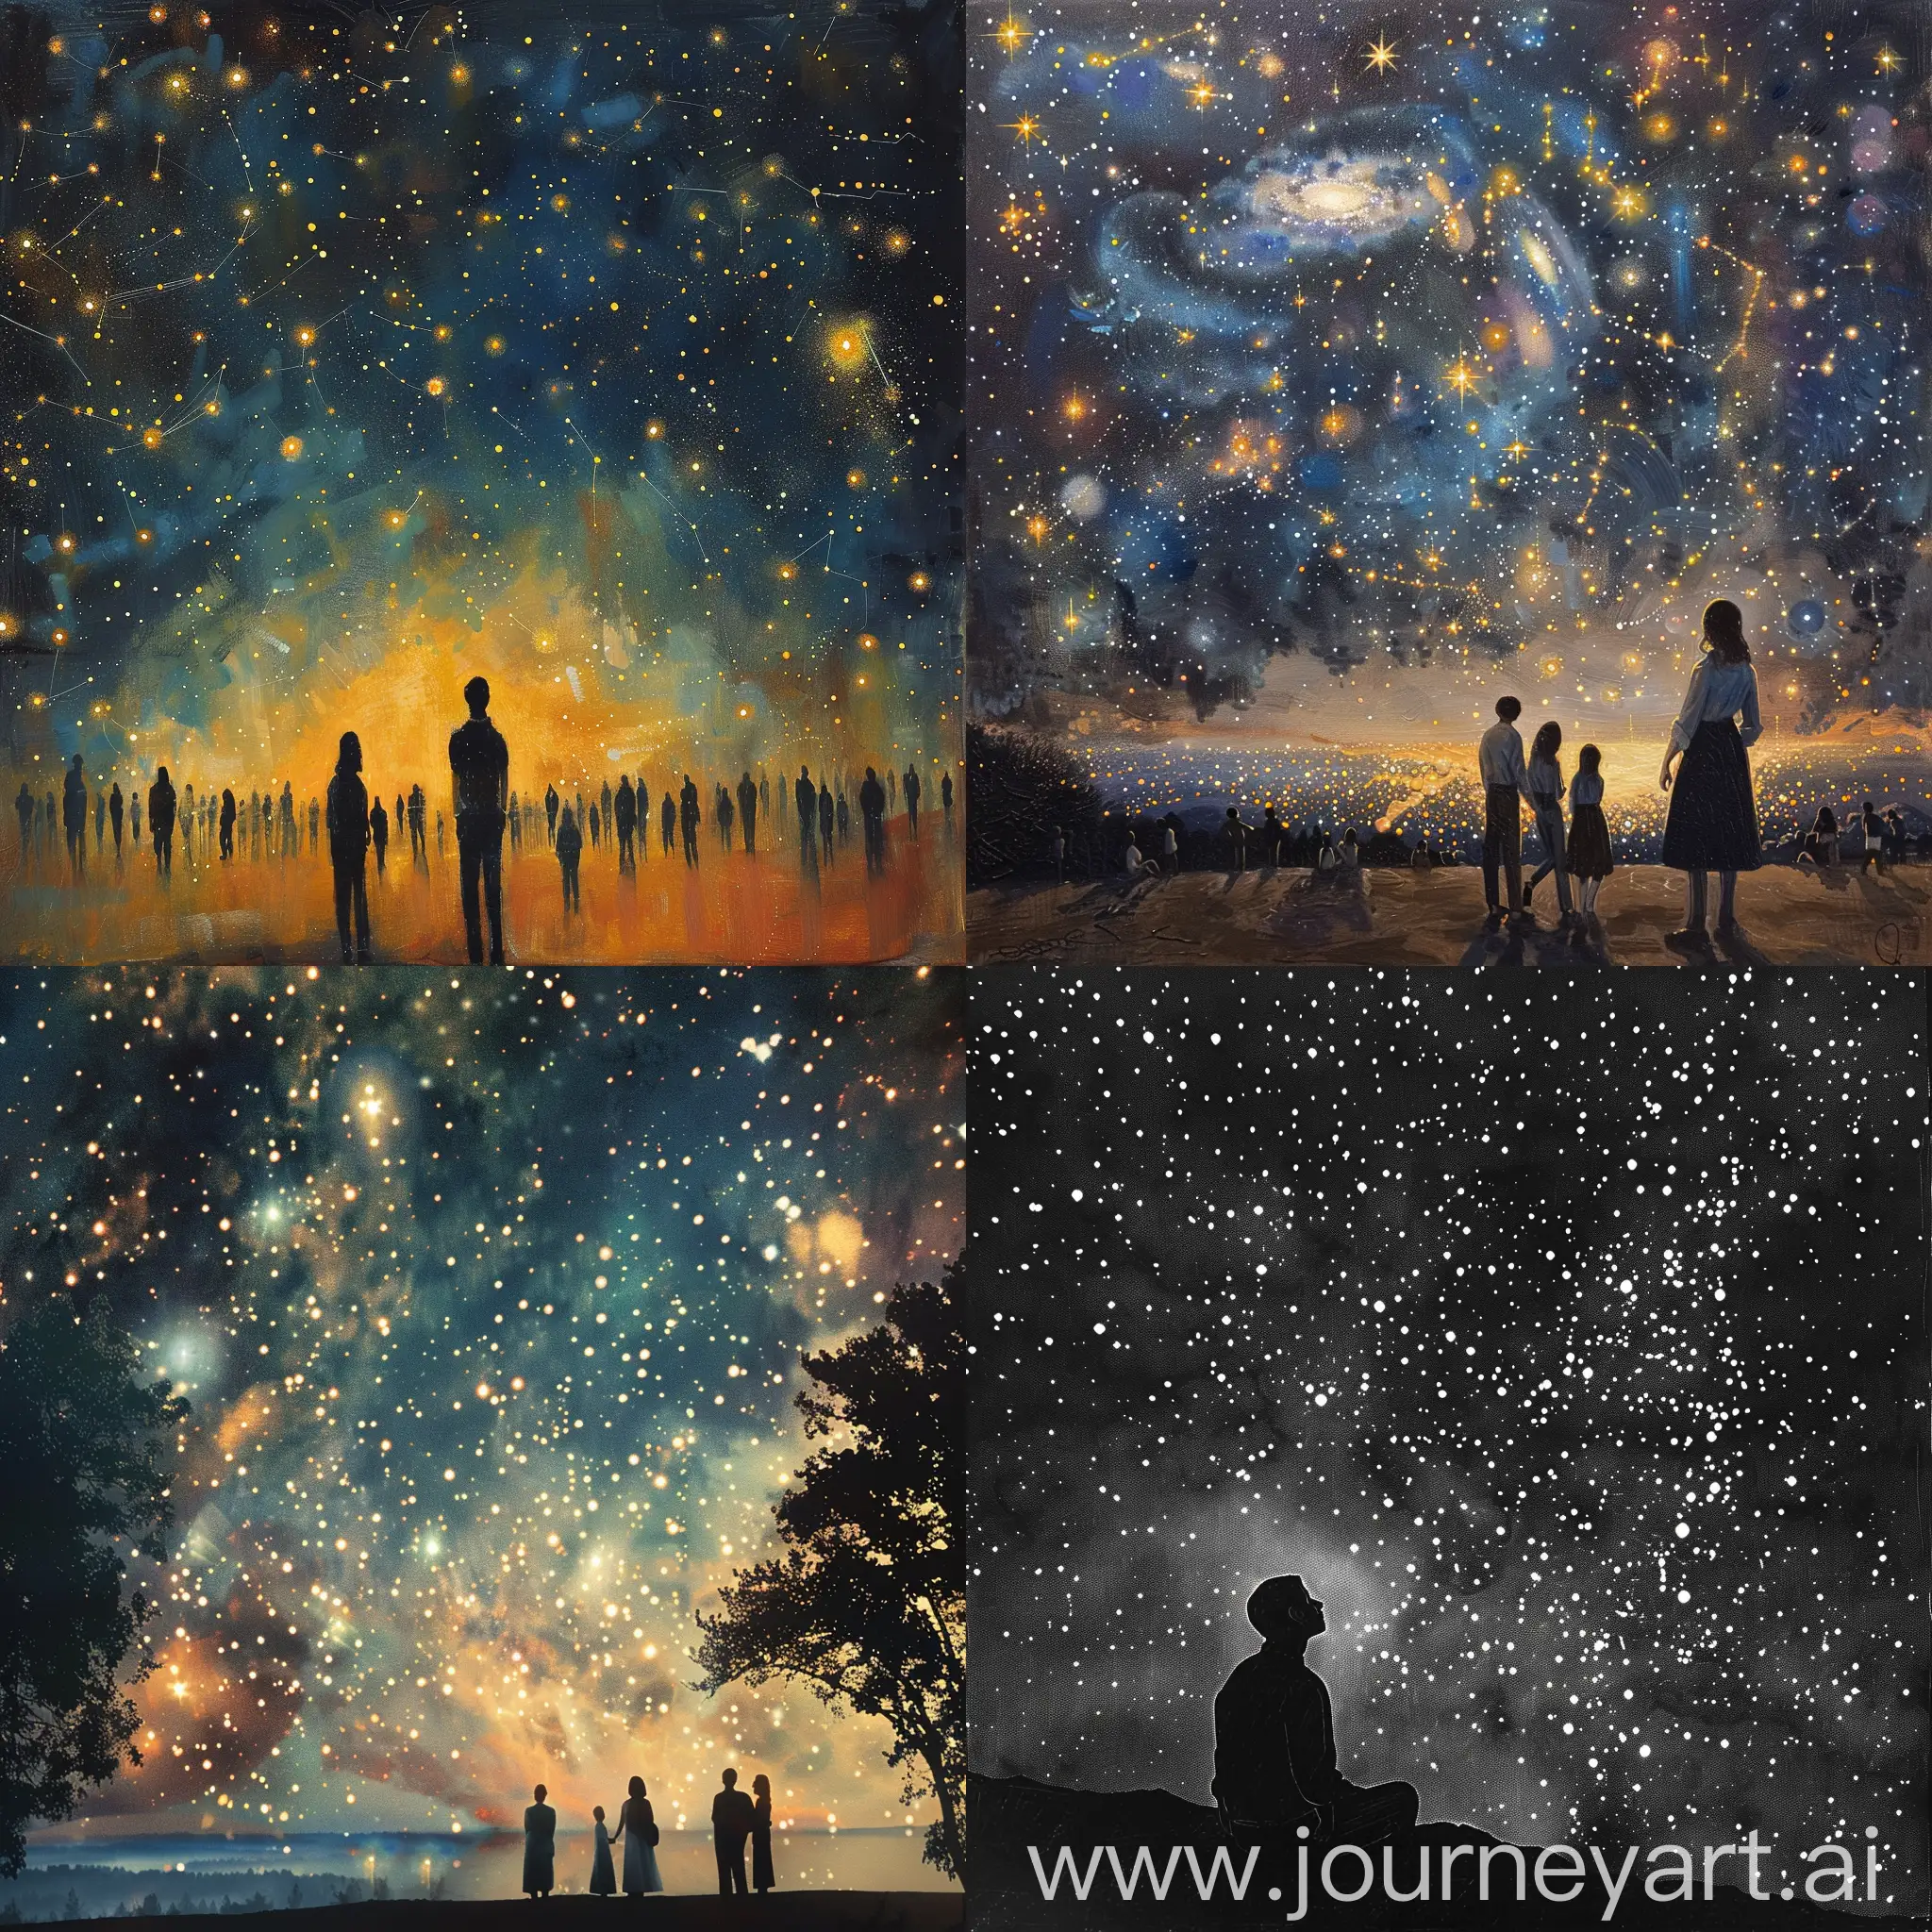 Starry-Night-Observation-Gazing-at-the-Mysteries-of-the-Universe